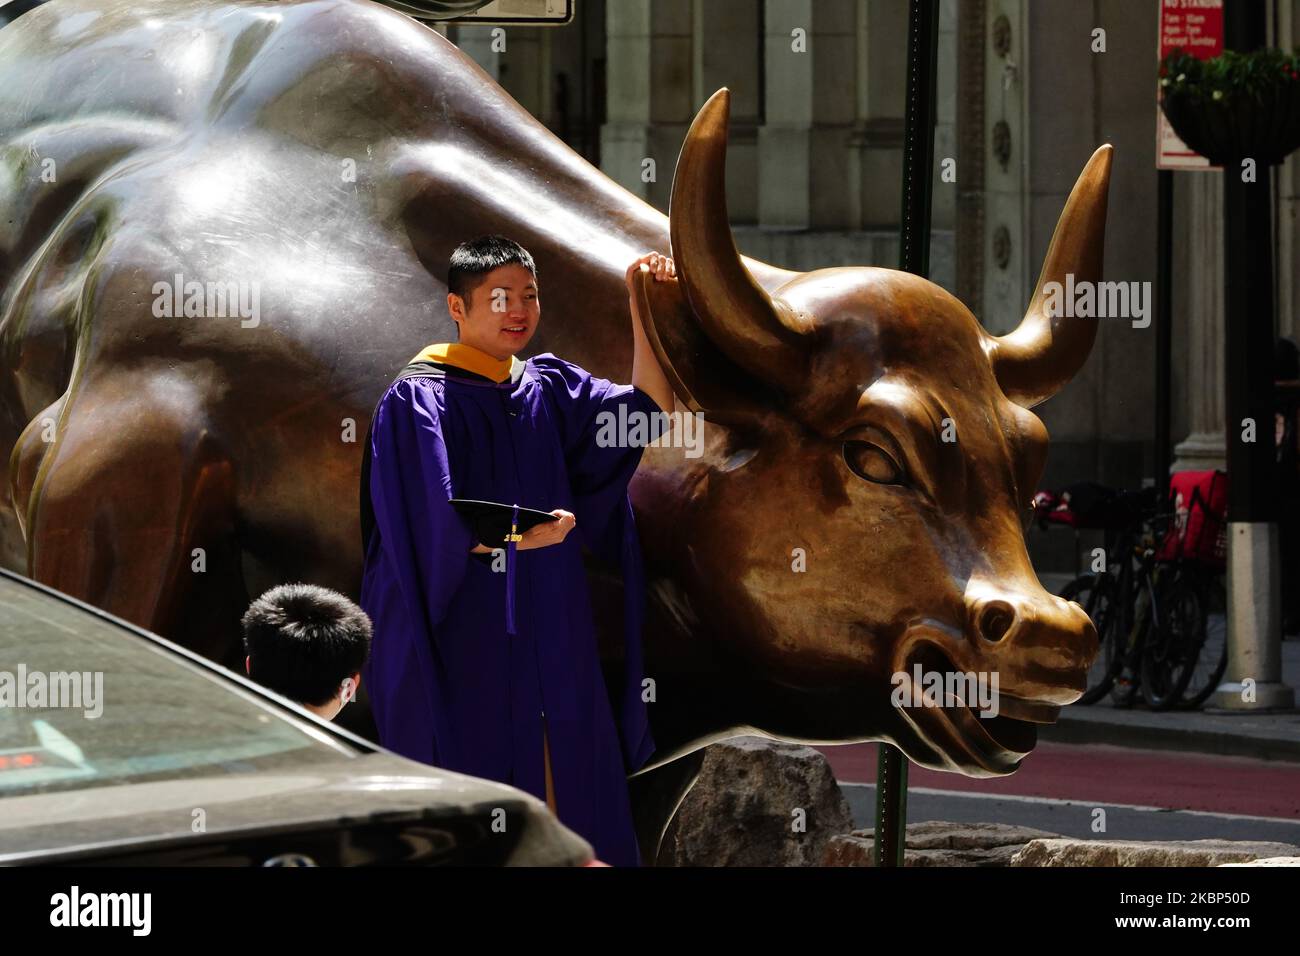 A view of new graduates taking photos at the Charging Bull during the coronavirus pandemic on May 20, 2020 in Bowling Green, New York City. COVID-19 has spread to most countries around the world, claiming over 316,000 lives with over 4.8 million infections reported. (Photo by John Nacion/NurPhoto) Stock Photo